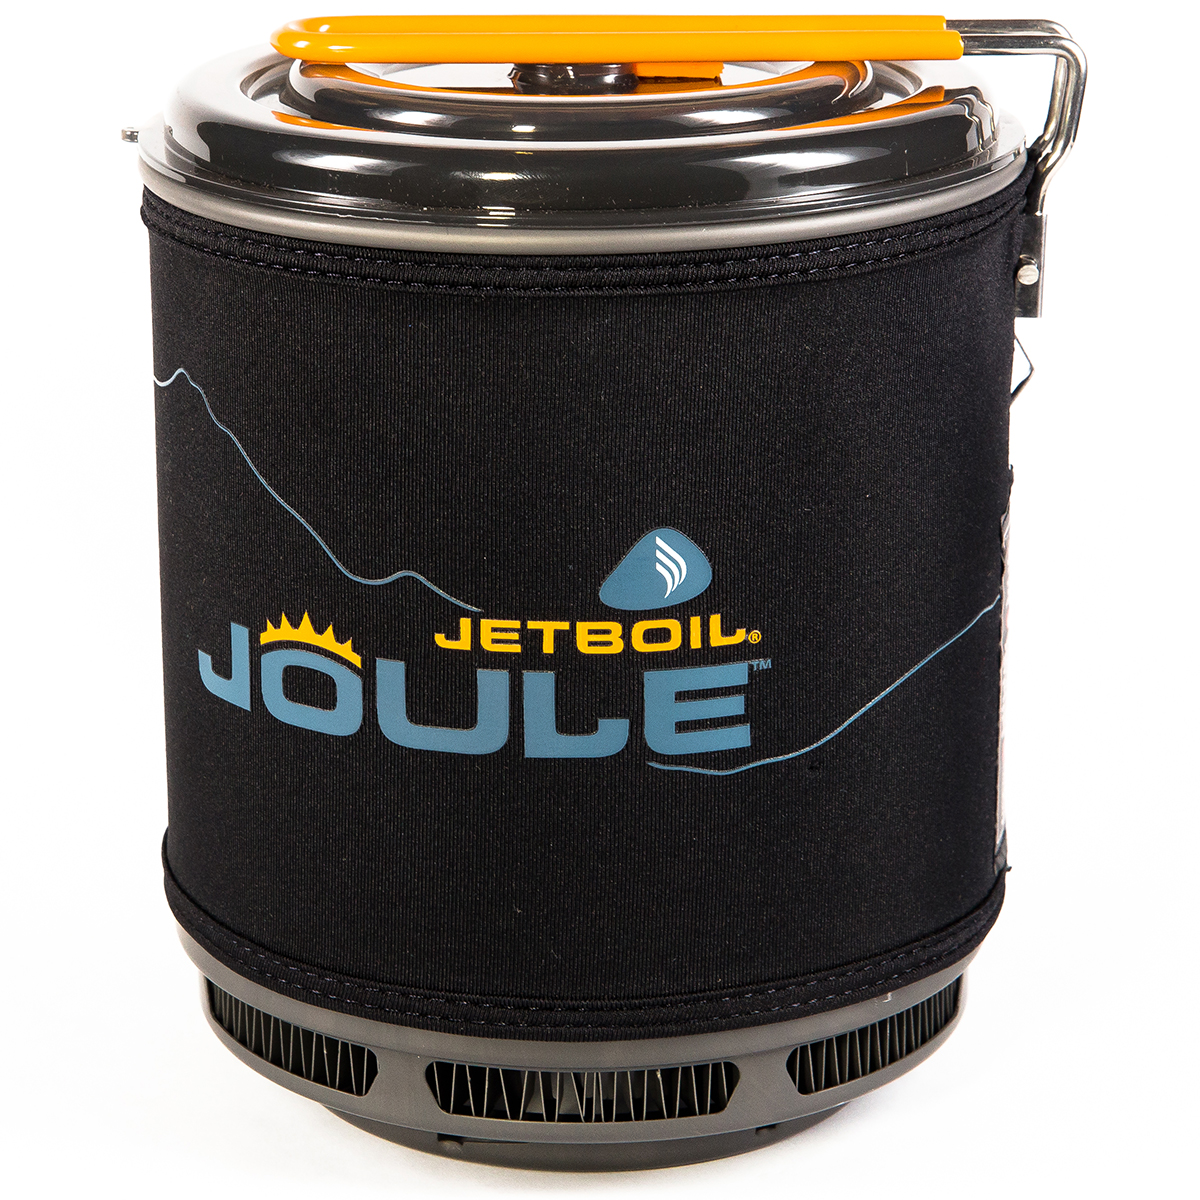 Jetboil Joule Camping Stove Cooking System